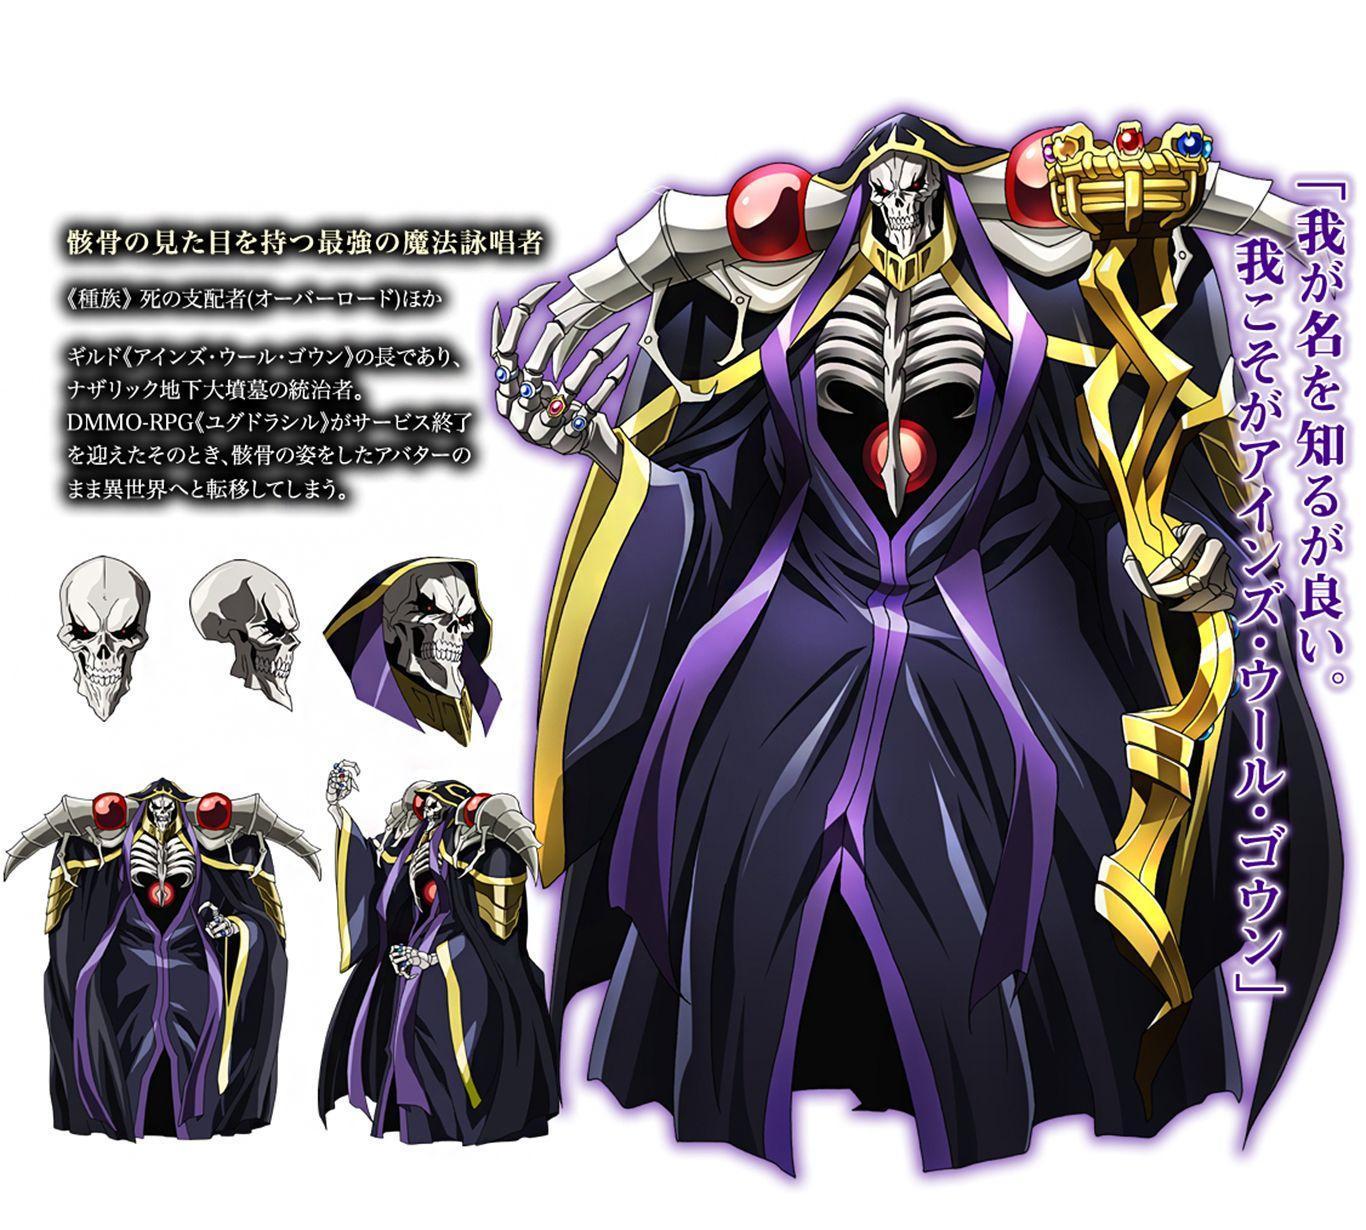 Anime Overlord Ainz Ooal Gown Overlord Wallpaper. Anime That I